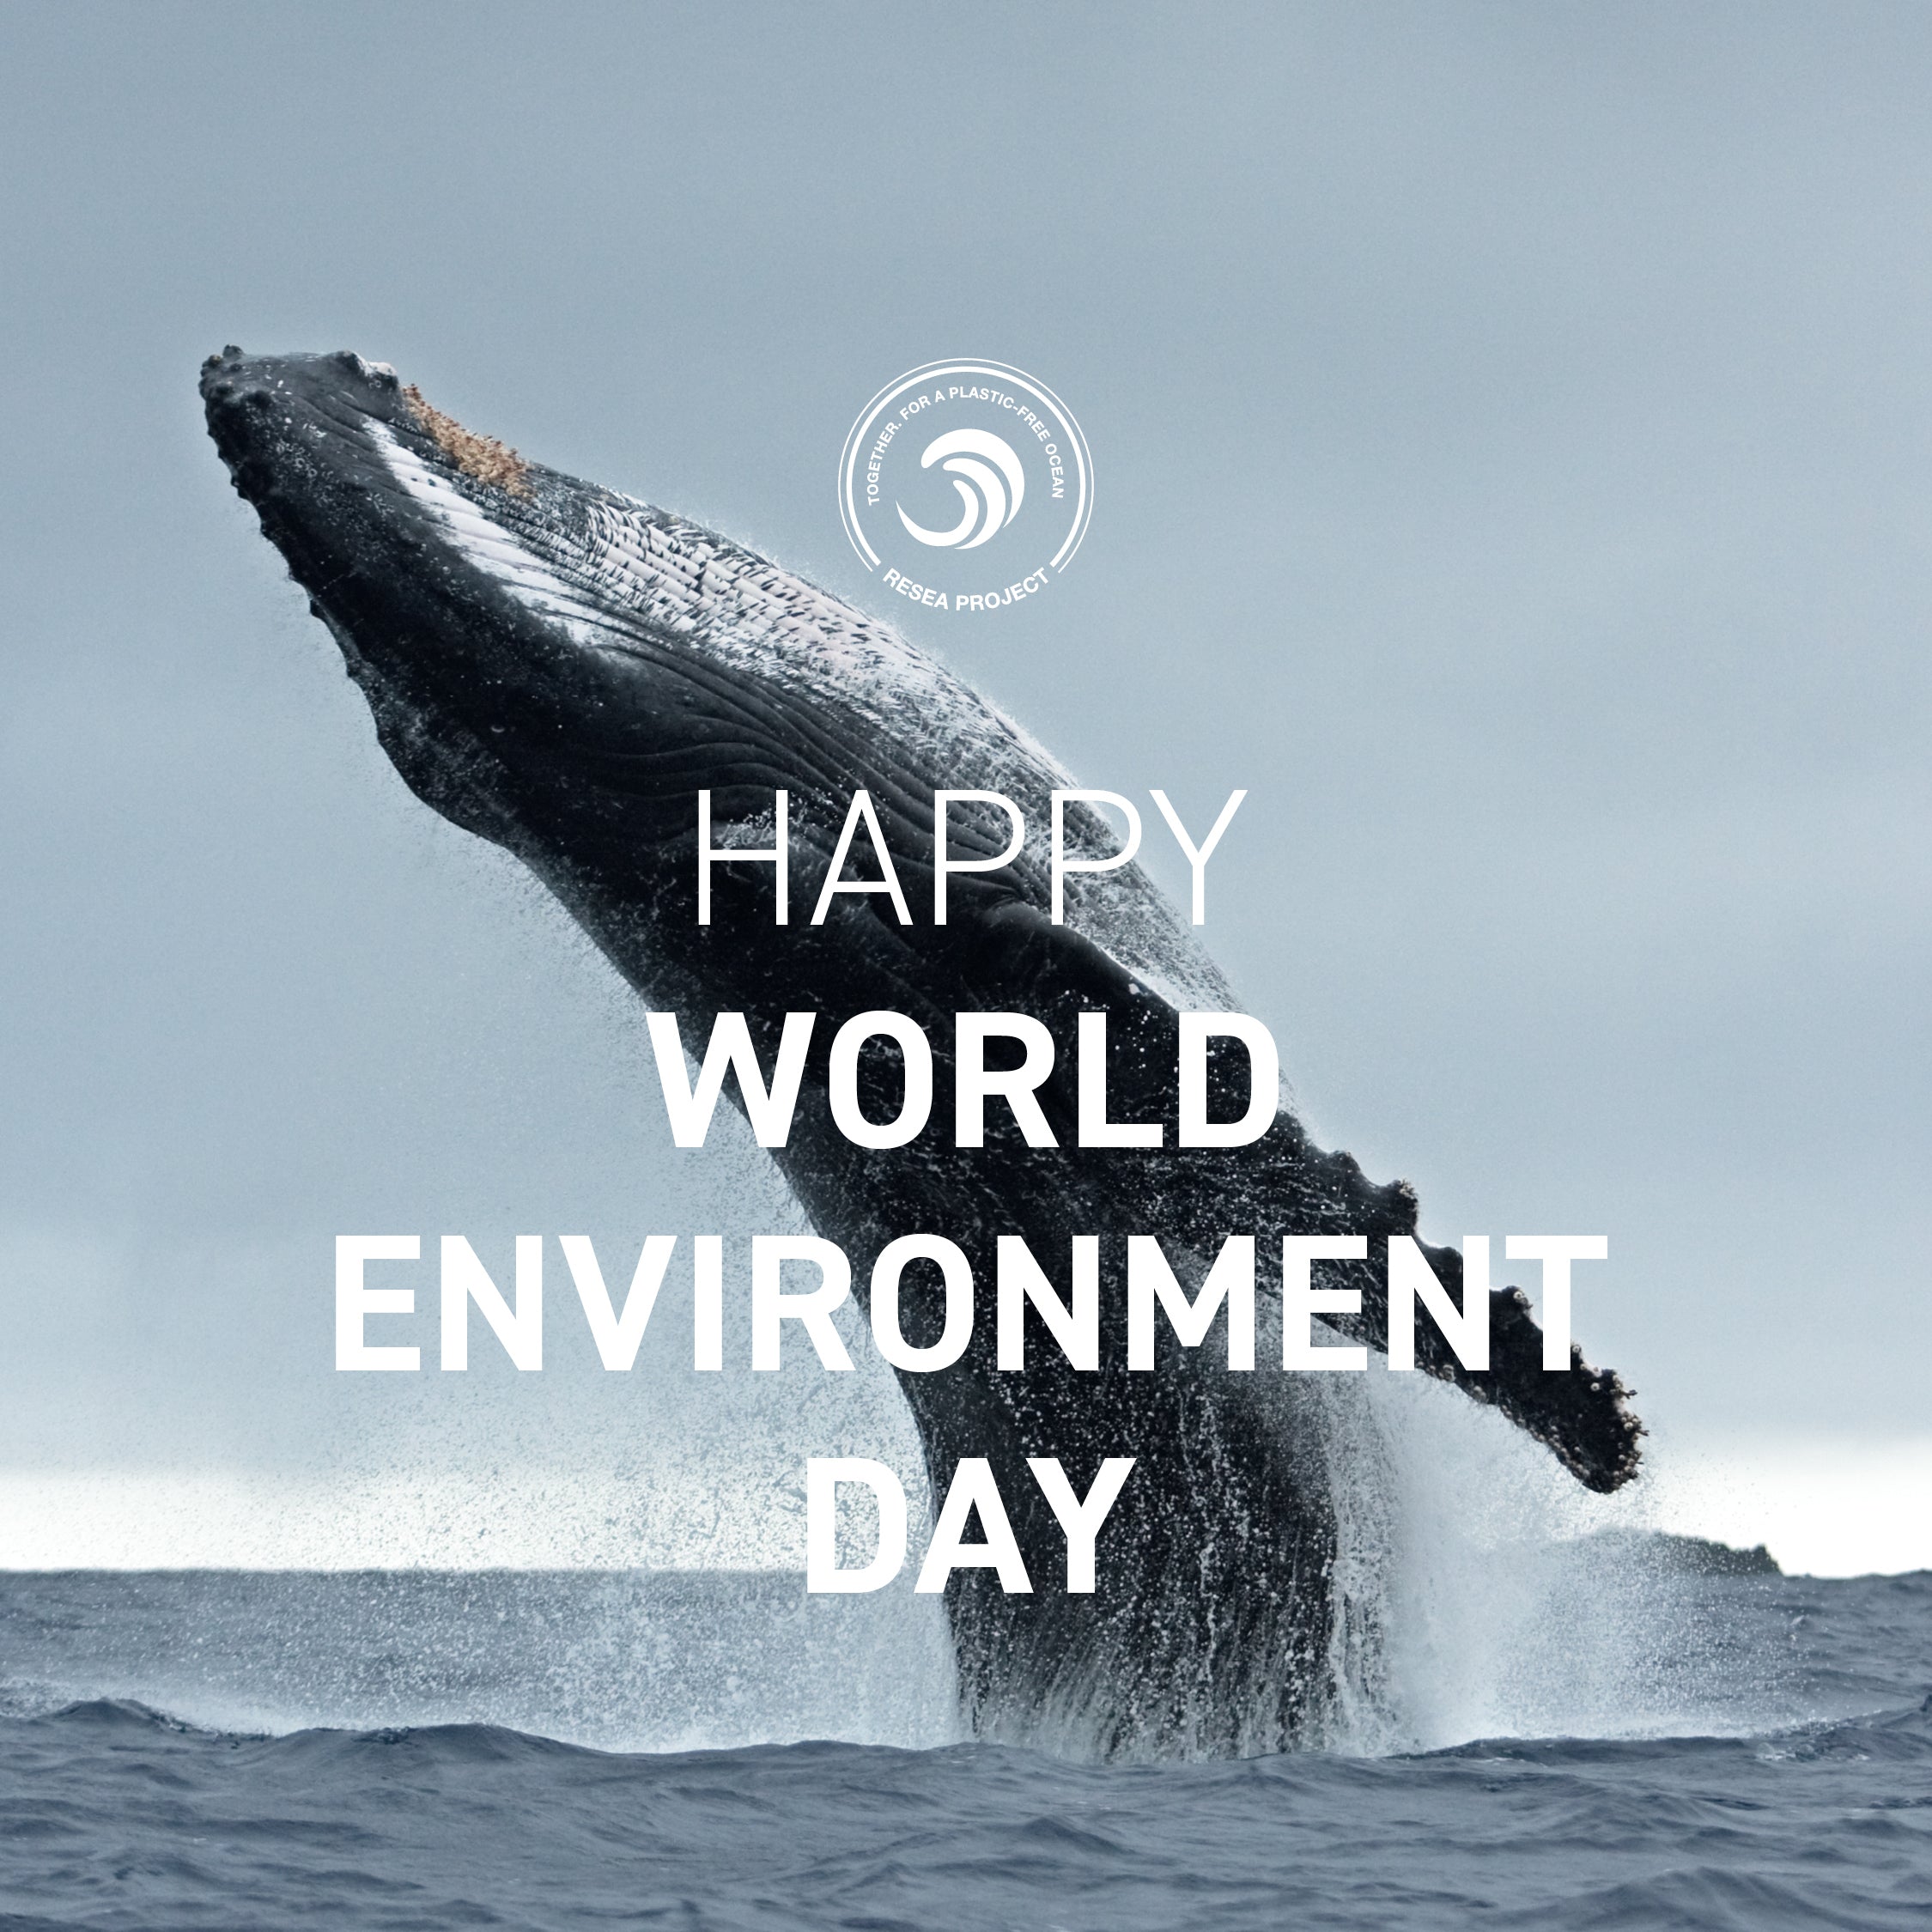 Celebrate World Environment Day with Love U!